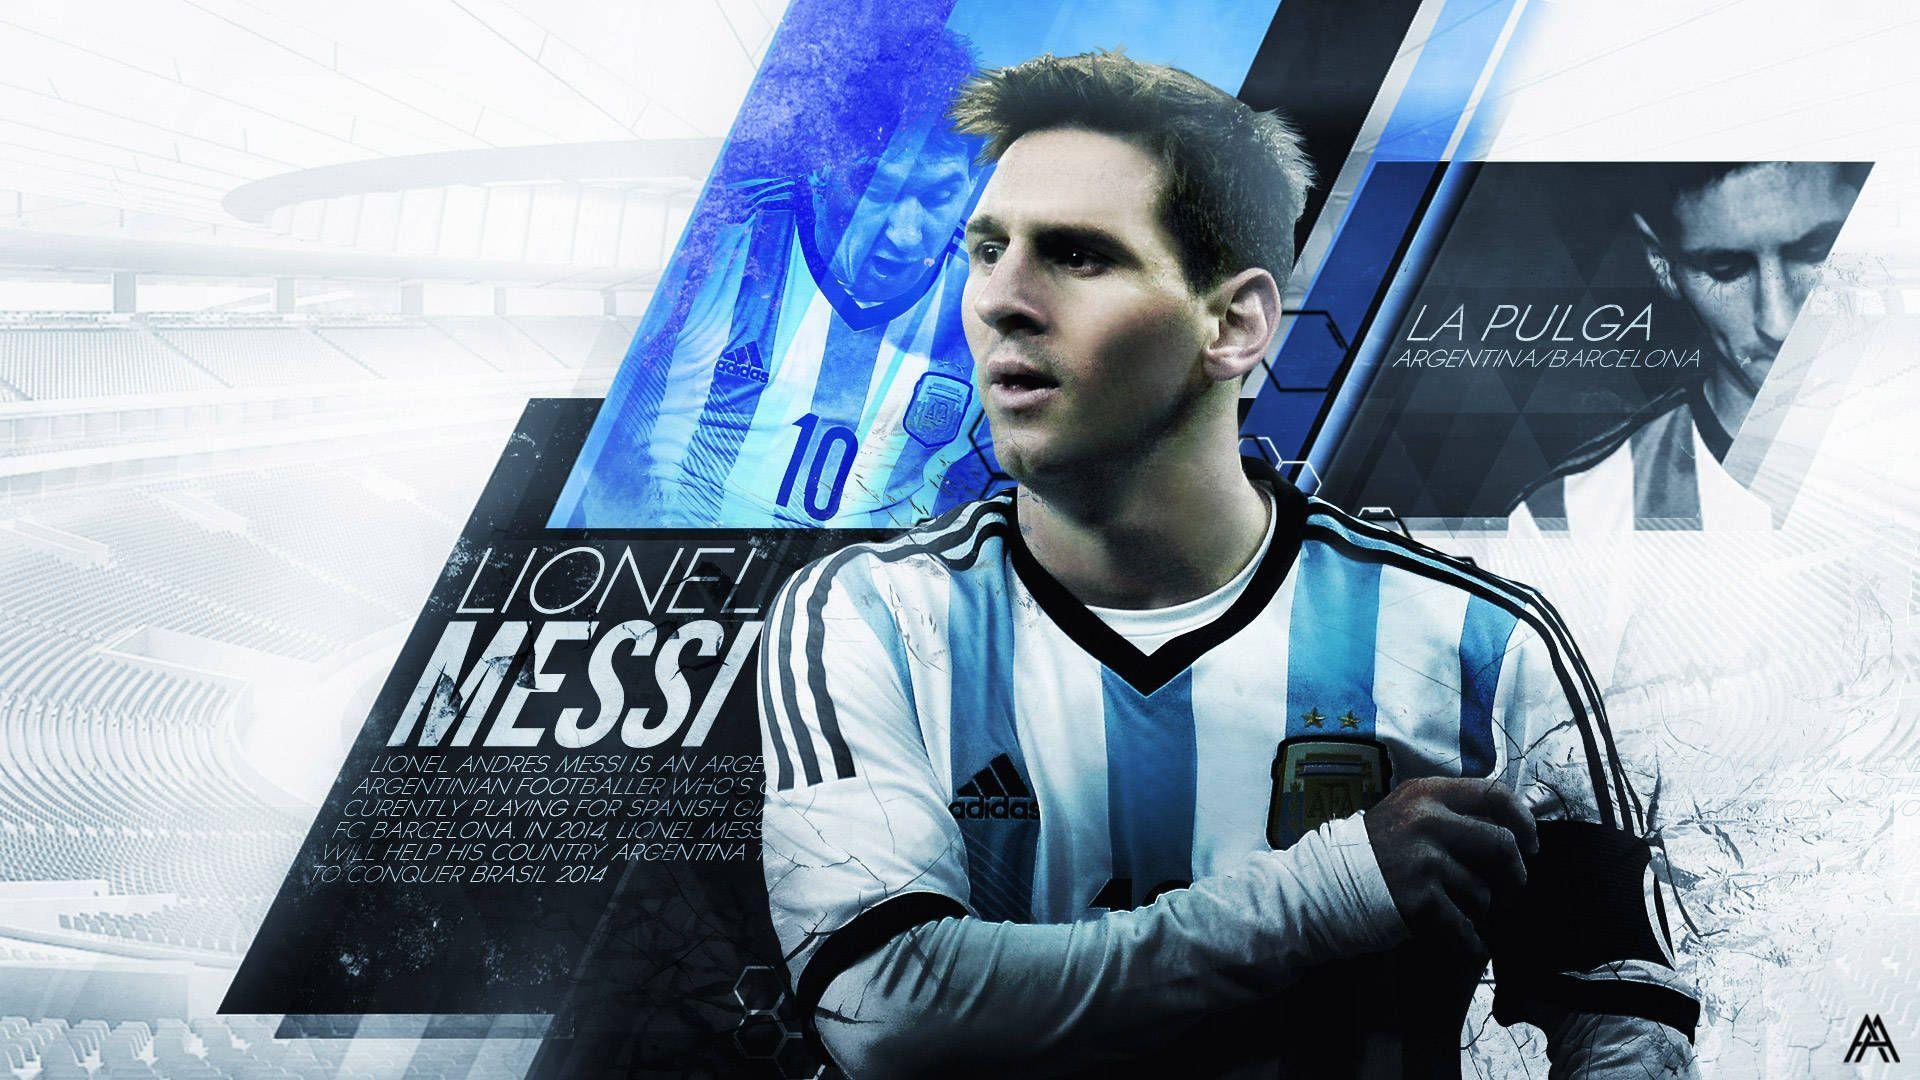 Lionel Messi 2017 Wallpapers HD 1080p Wallpaper Cave